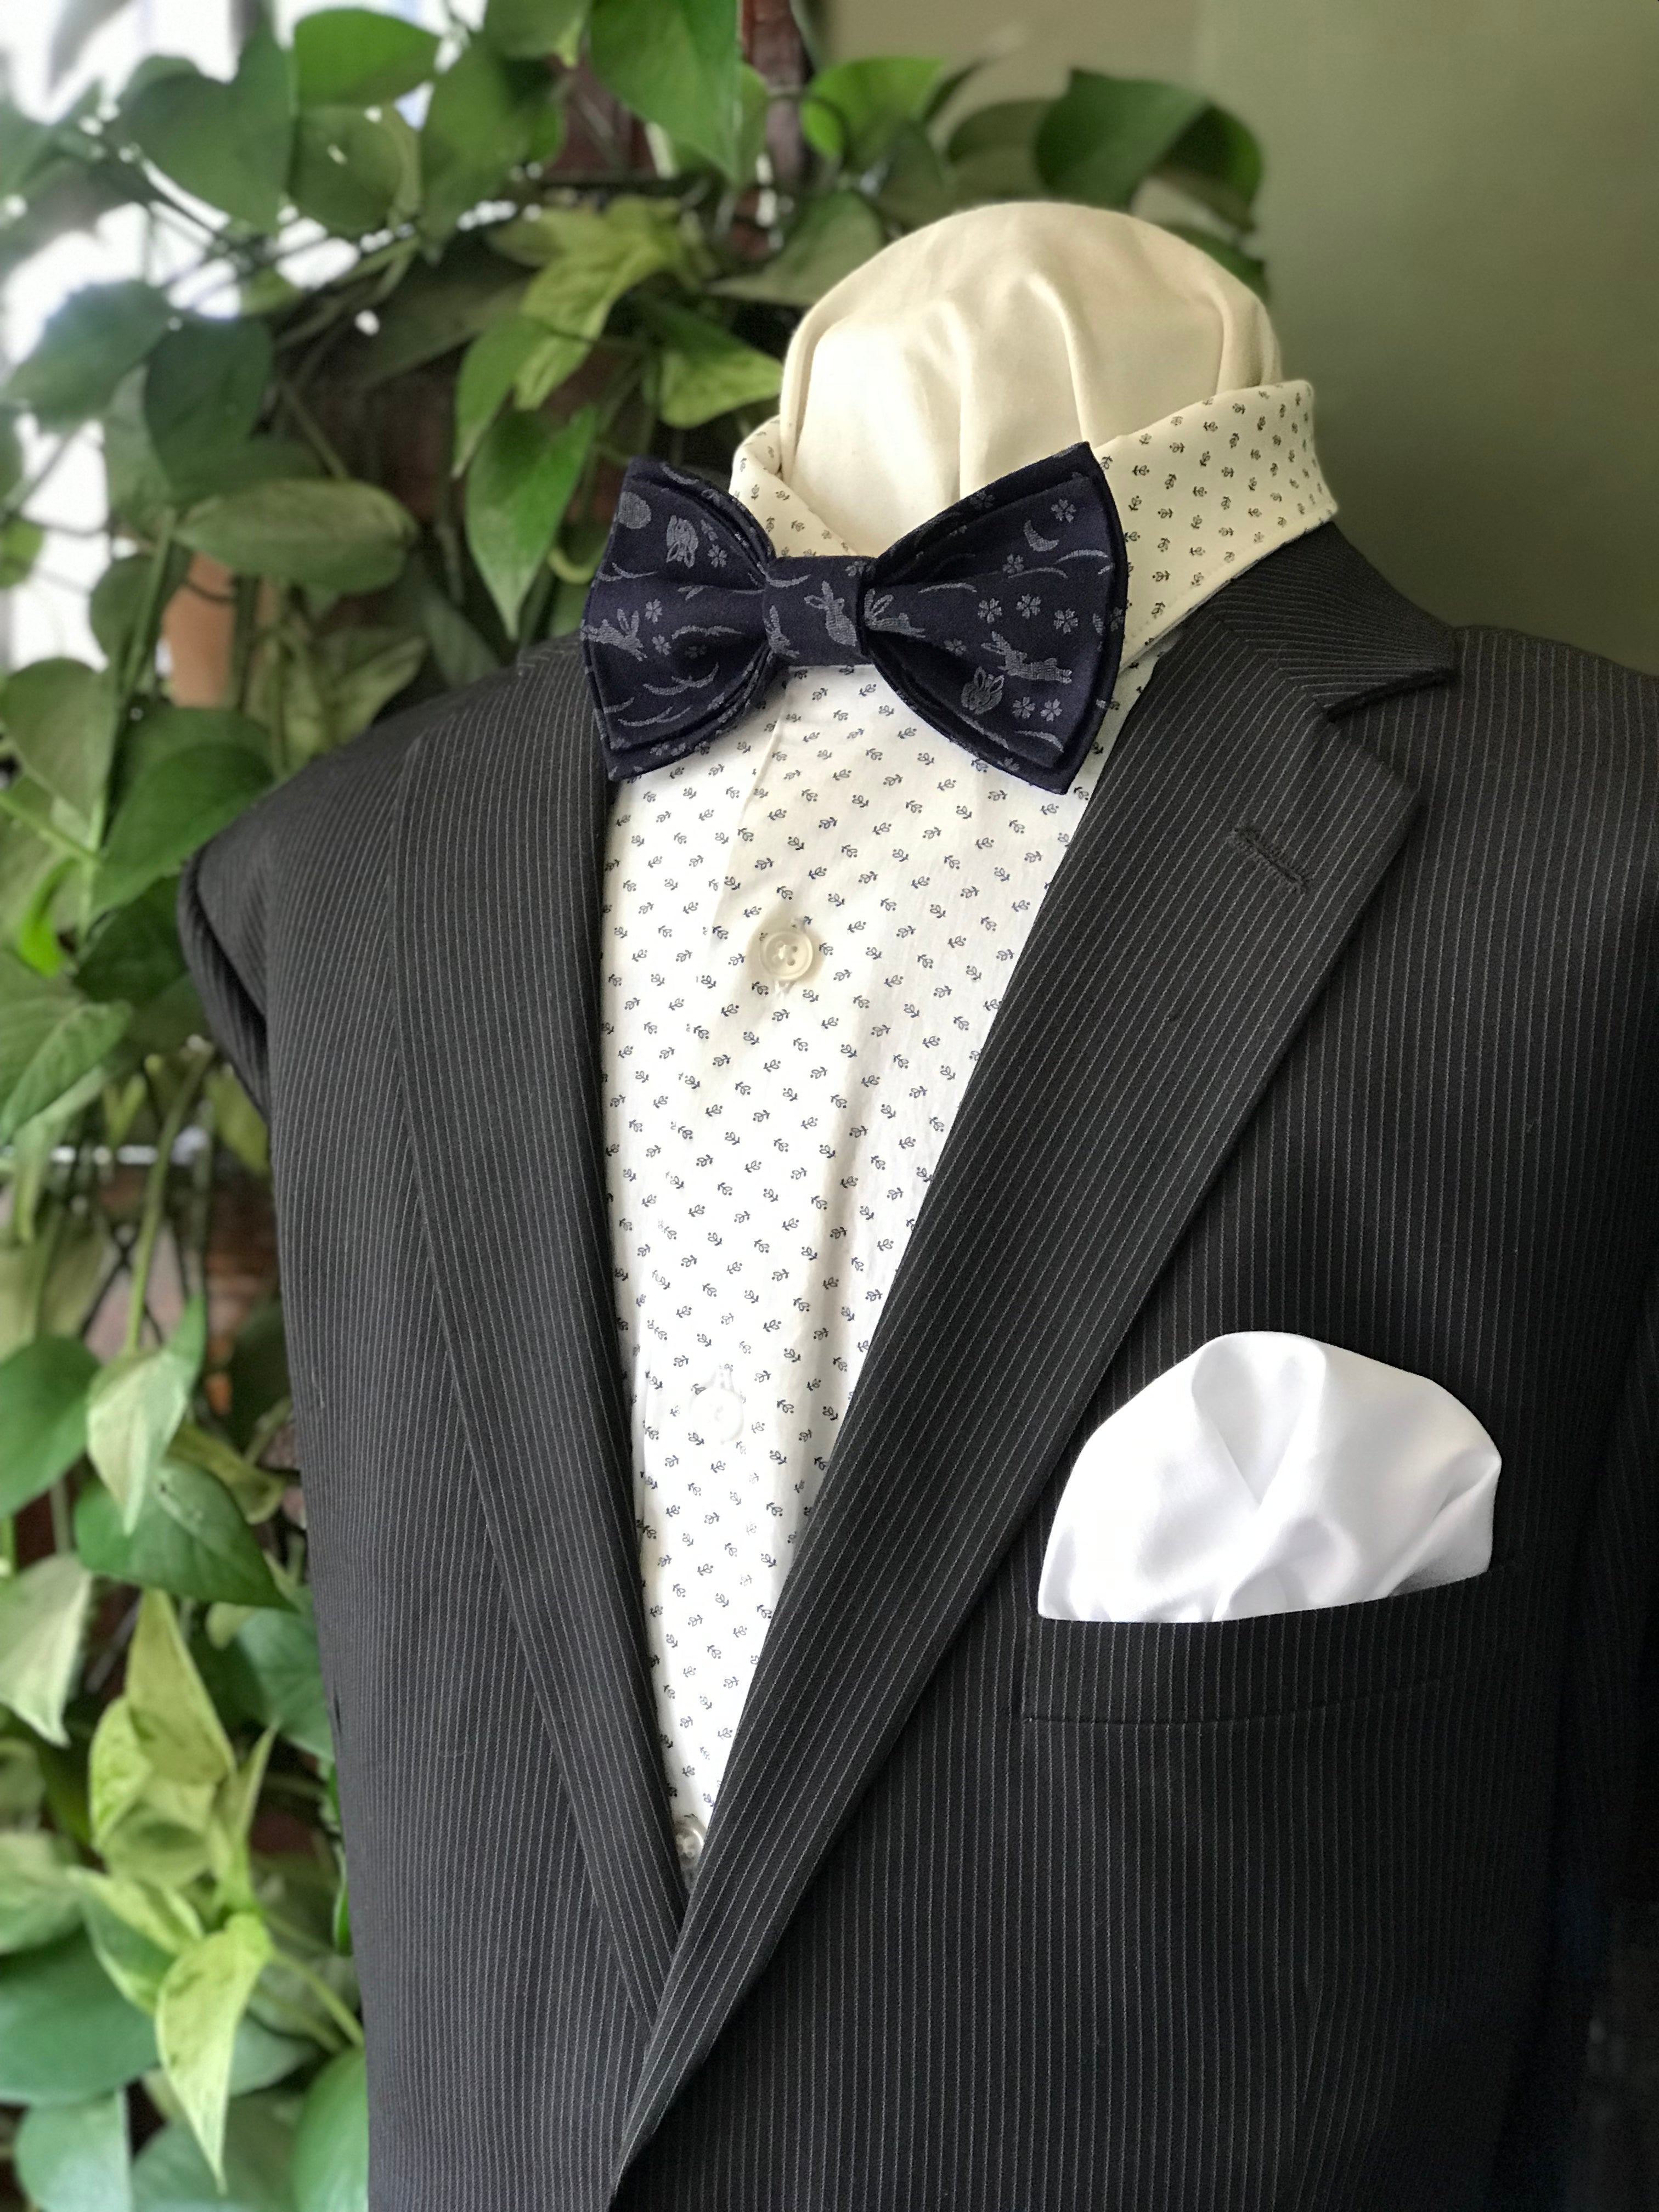 Father & Son Bow Tie Set - White Rabbits with Navy Blue Background